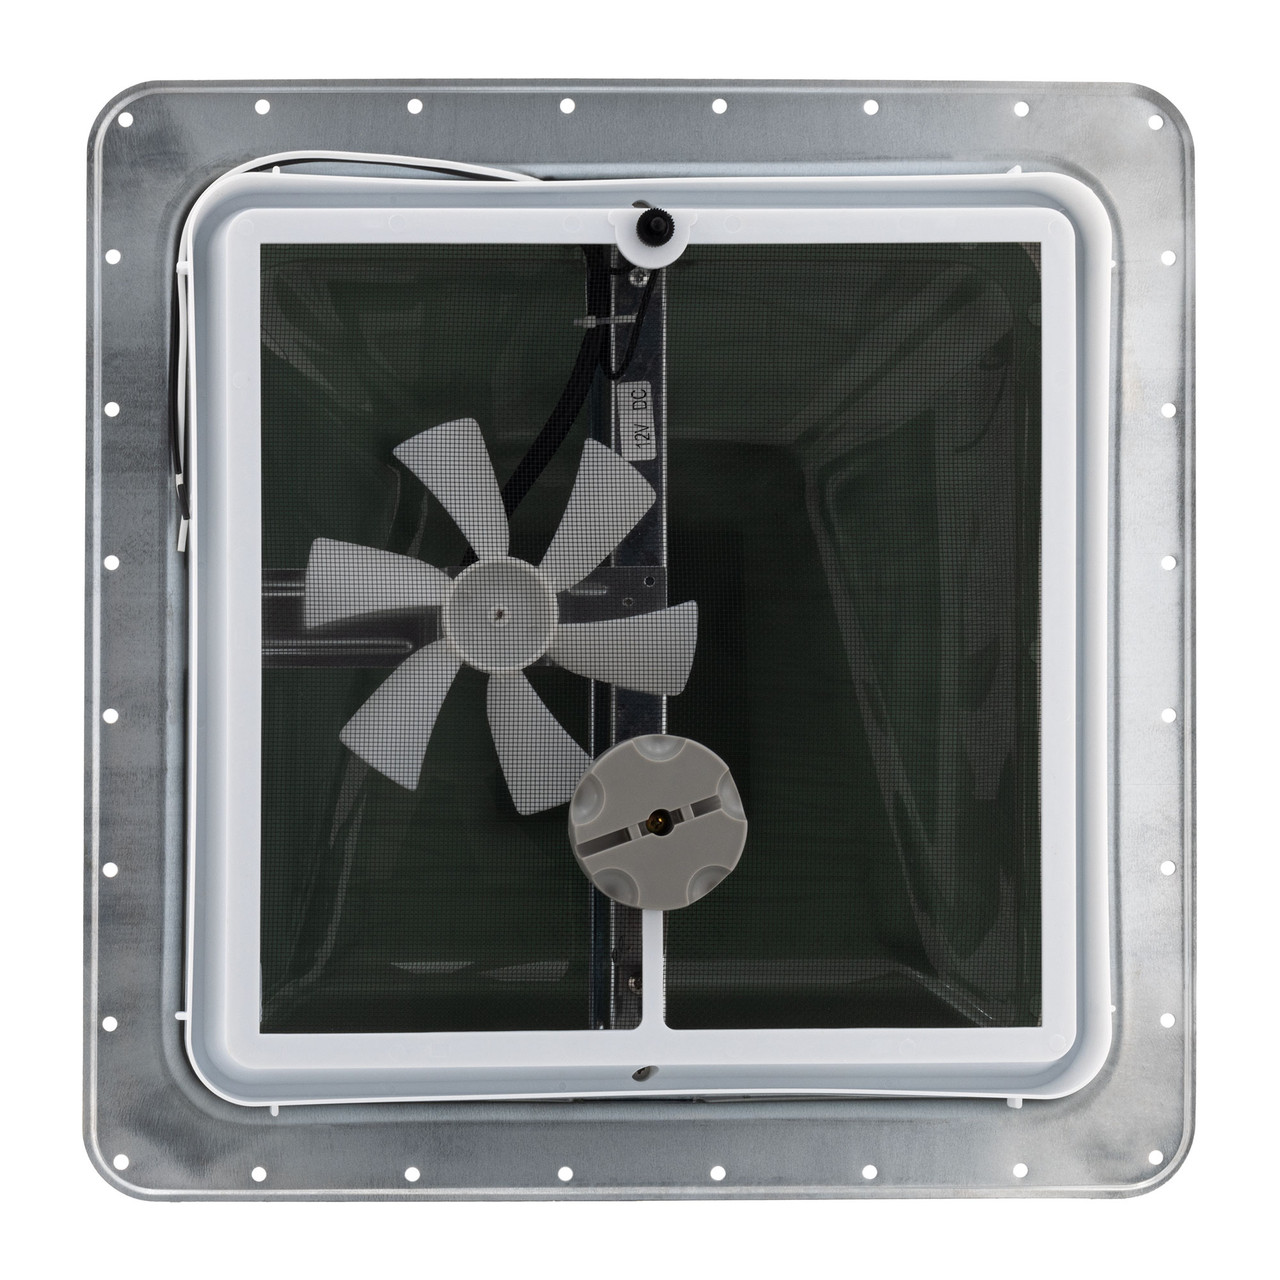 Upgrade RV Roof Fans To Boost Ventilation